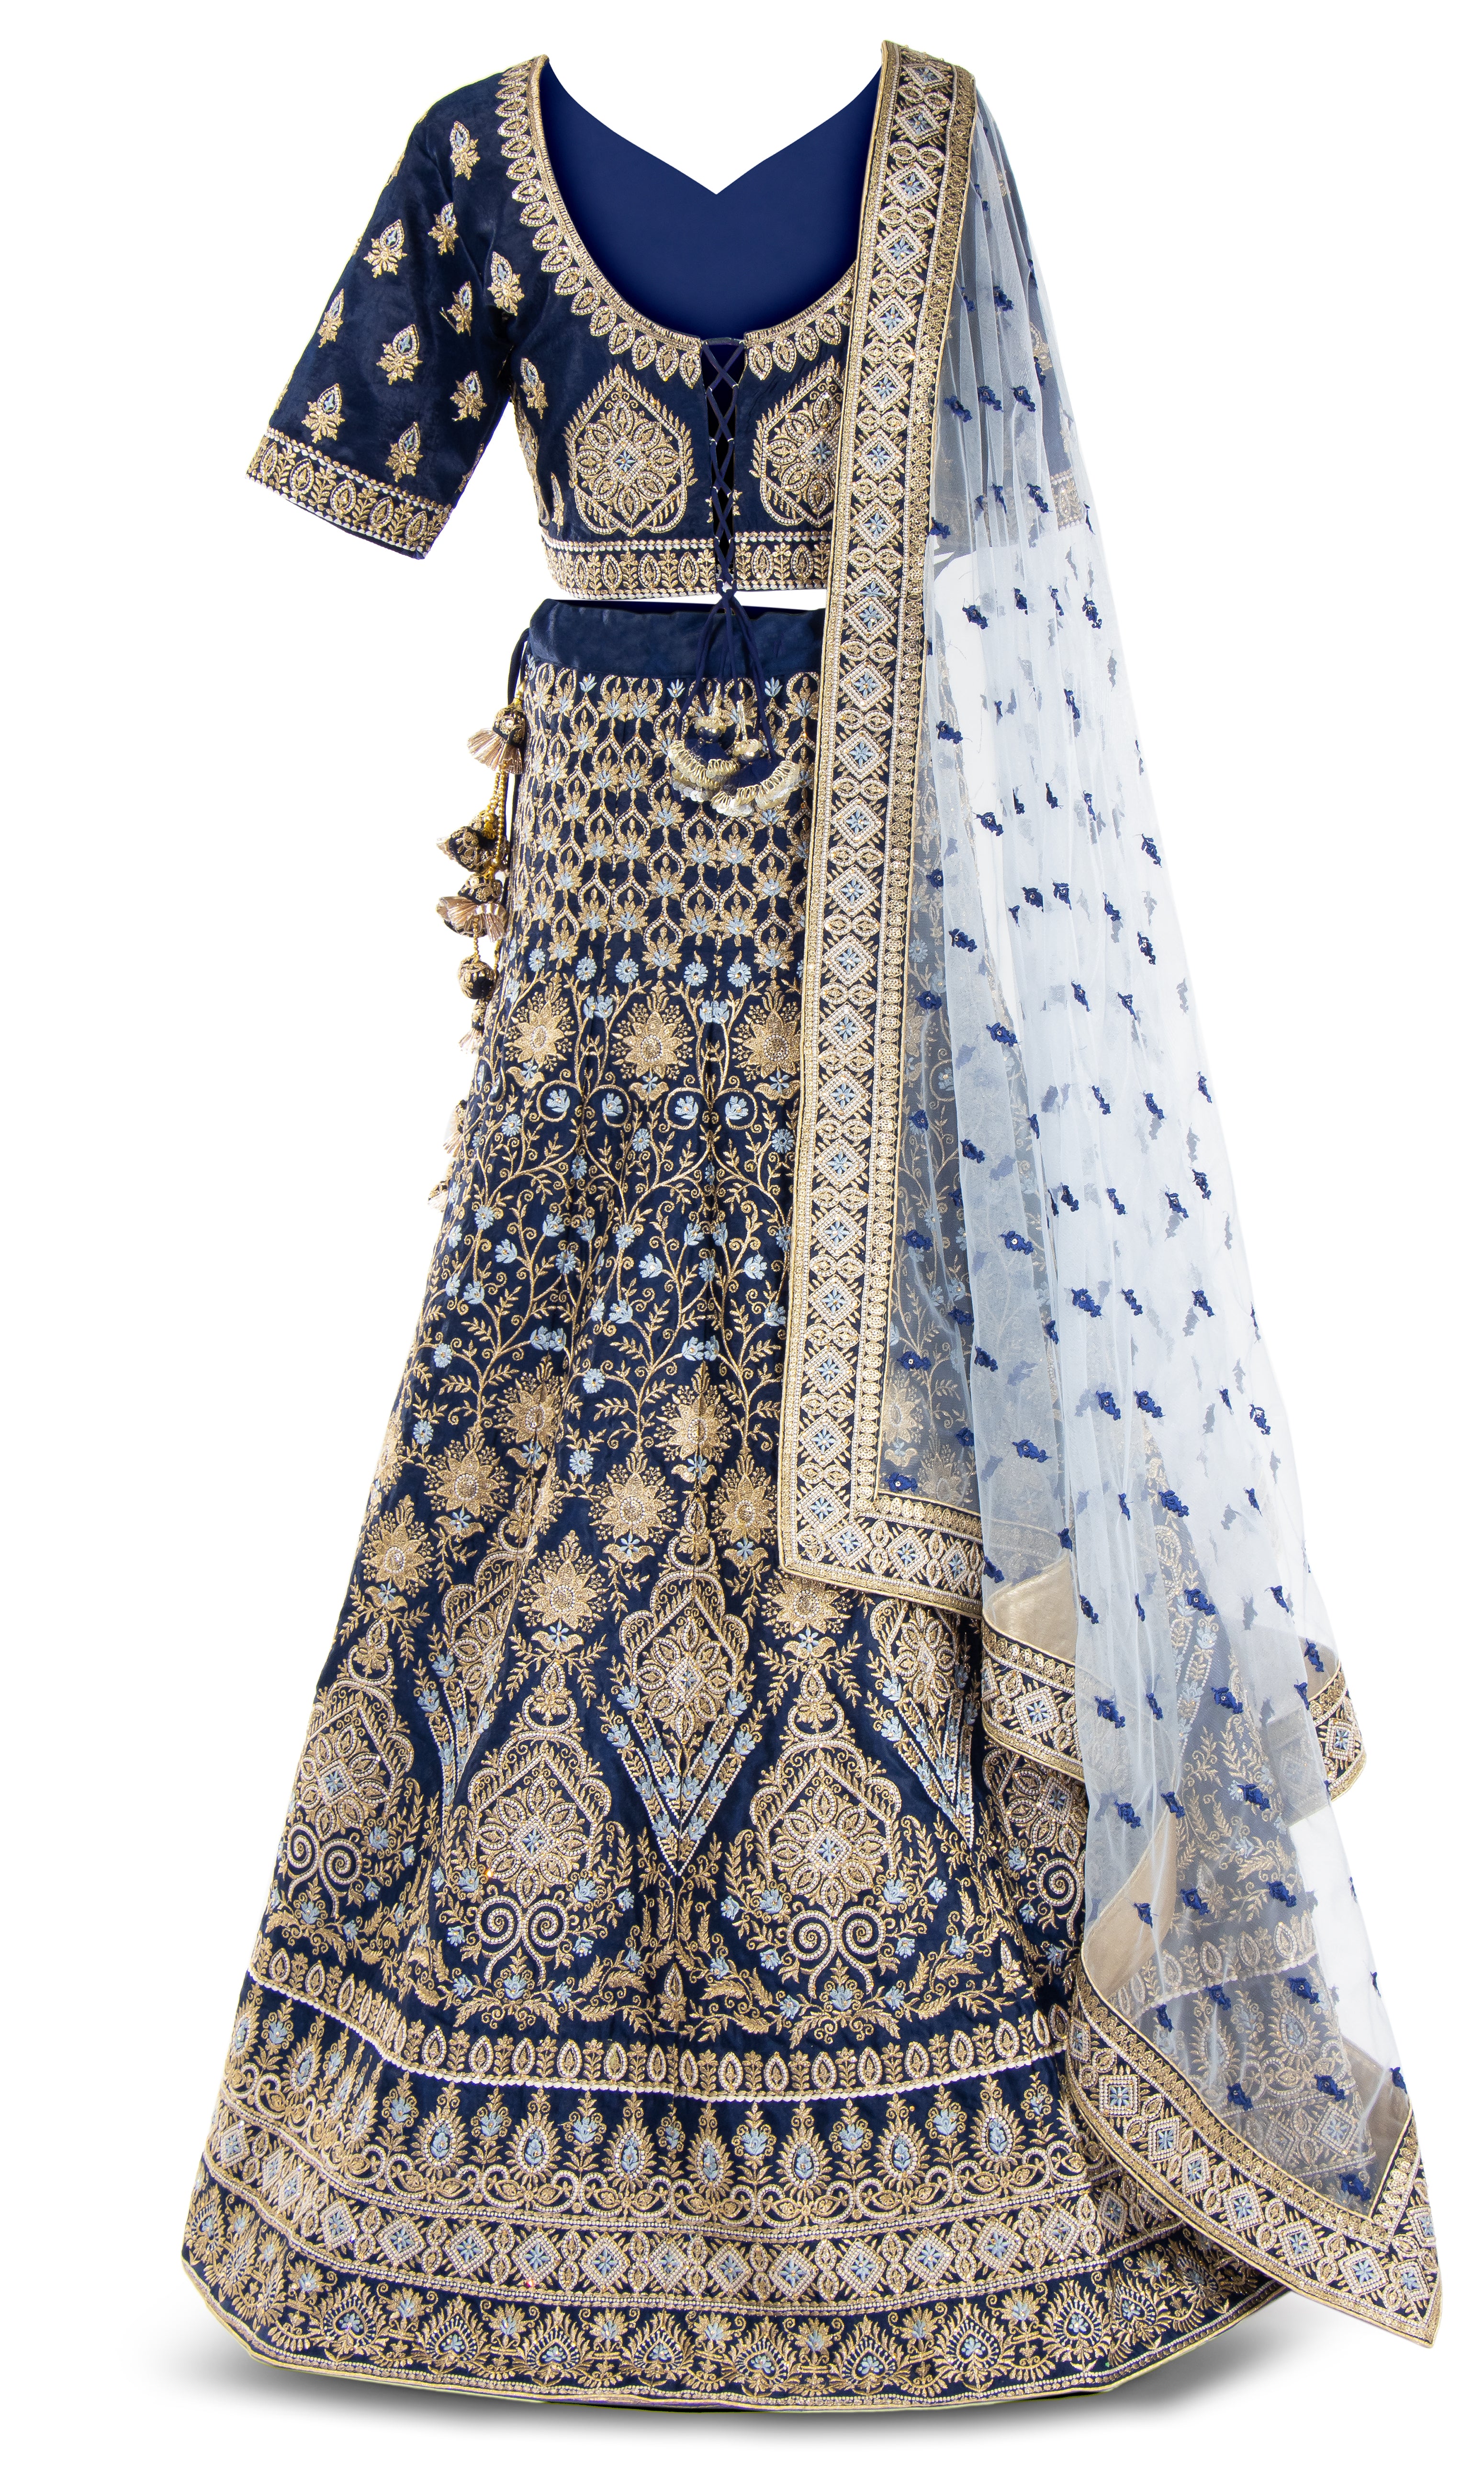 Royal Blue Lehenga with matching A-line skirt and white net dupatta. You’re bound to get the royal treatment.